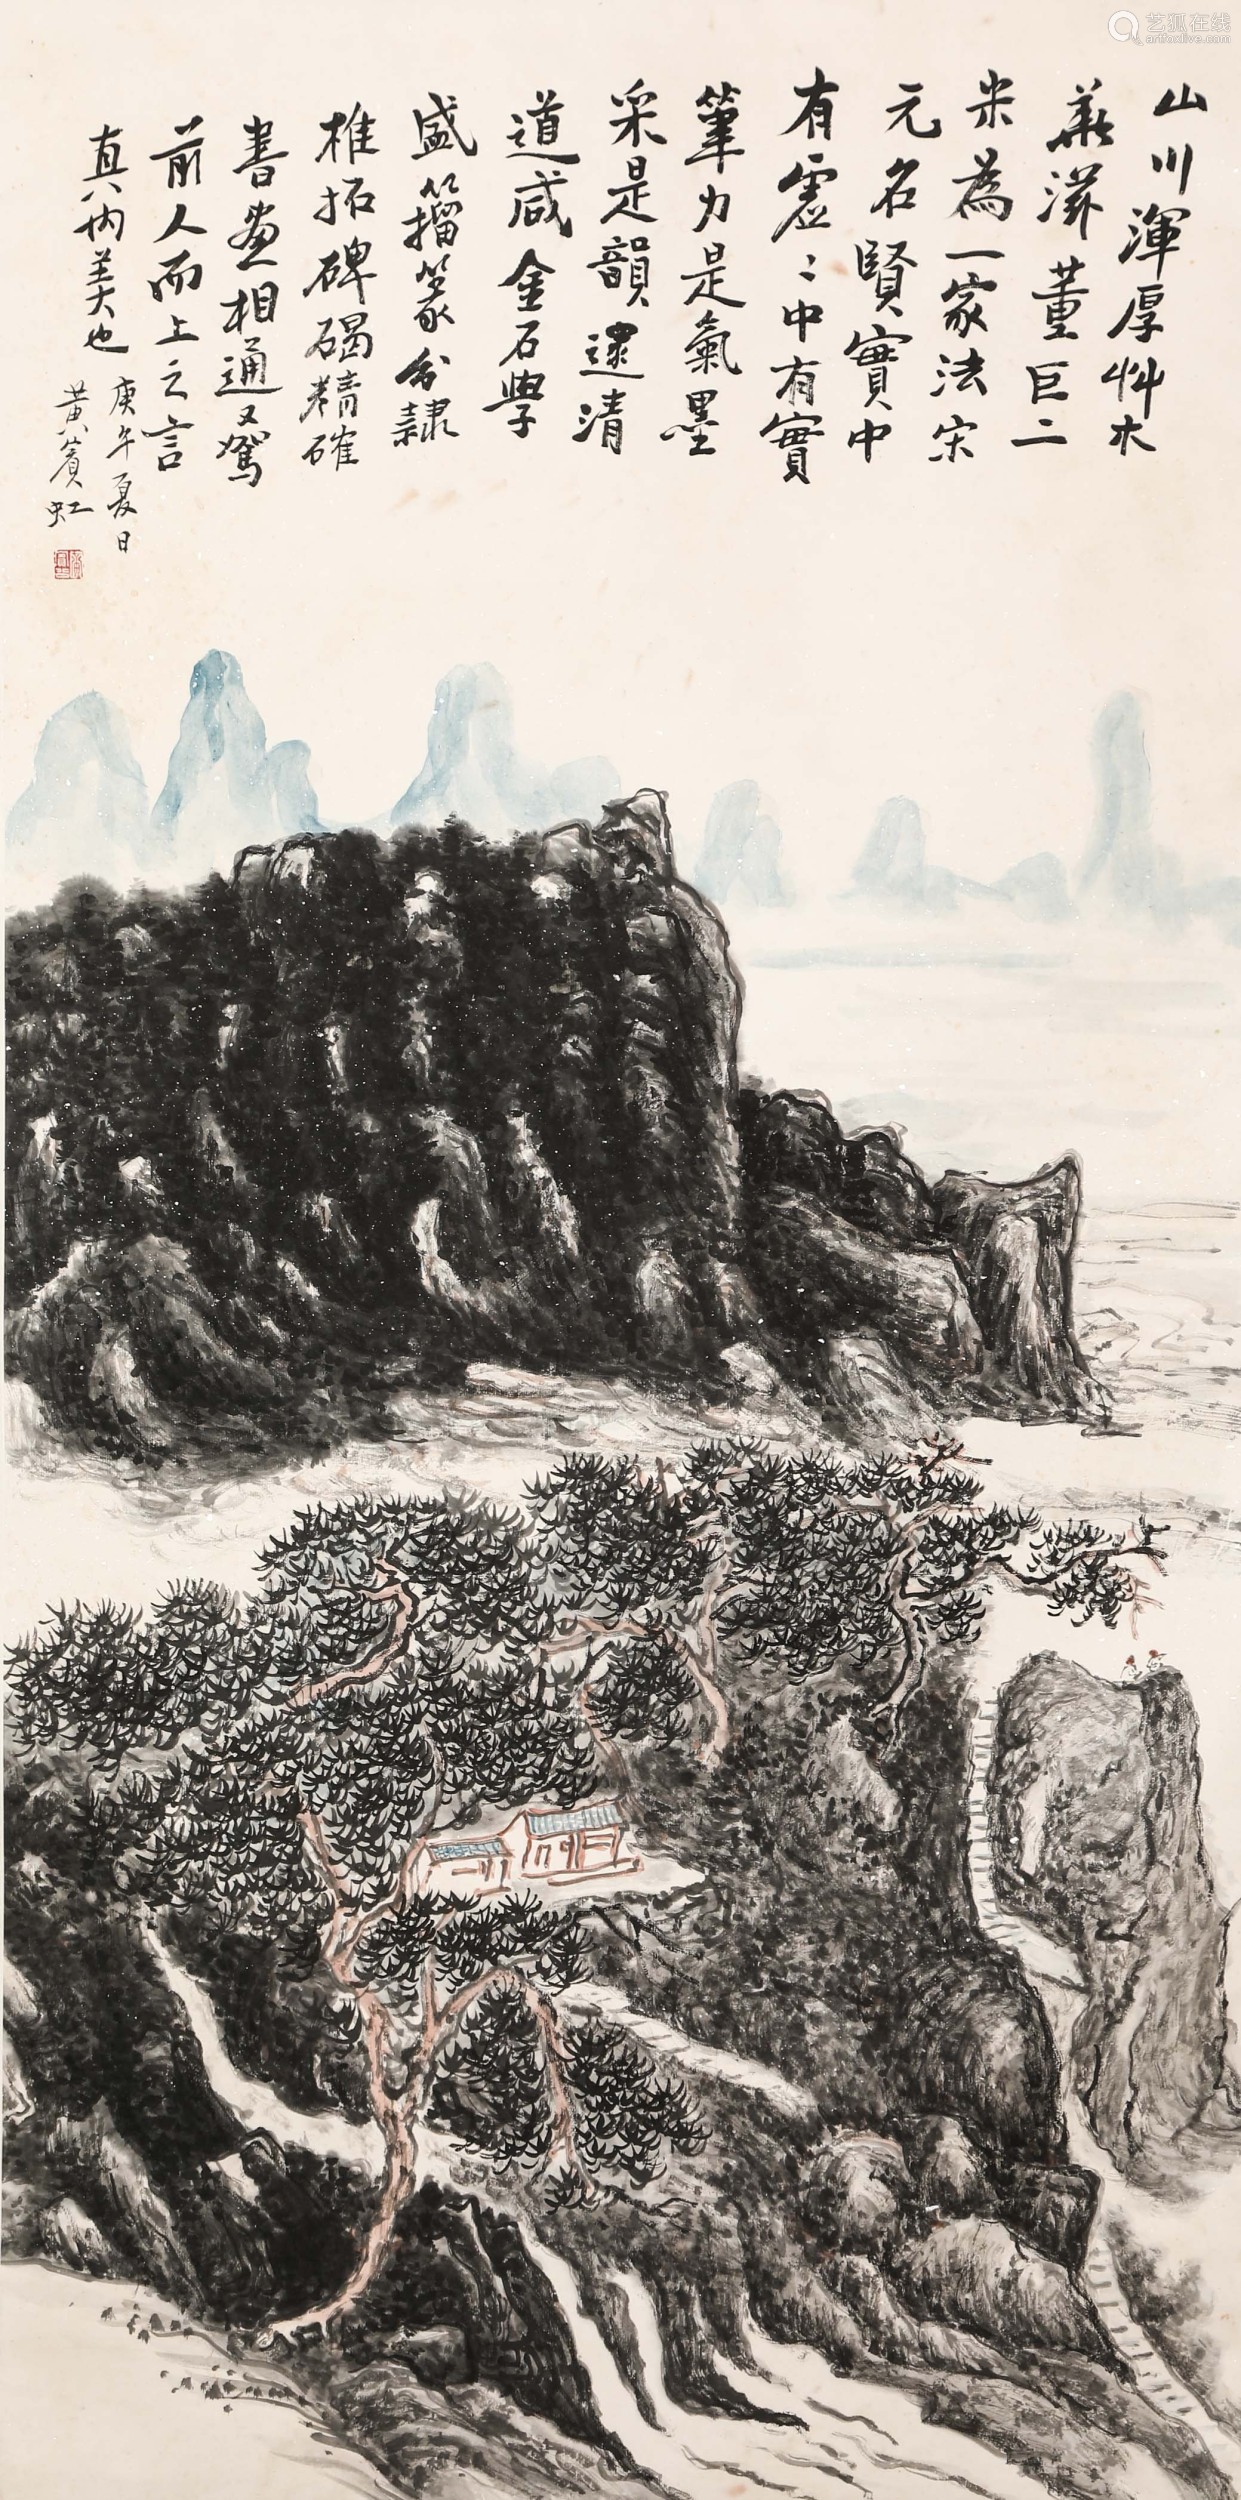 Chinese ink painting,
Huang Binhong's landscape paintings